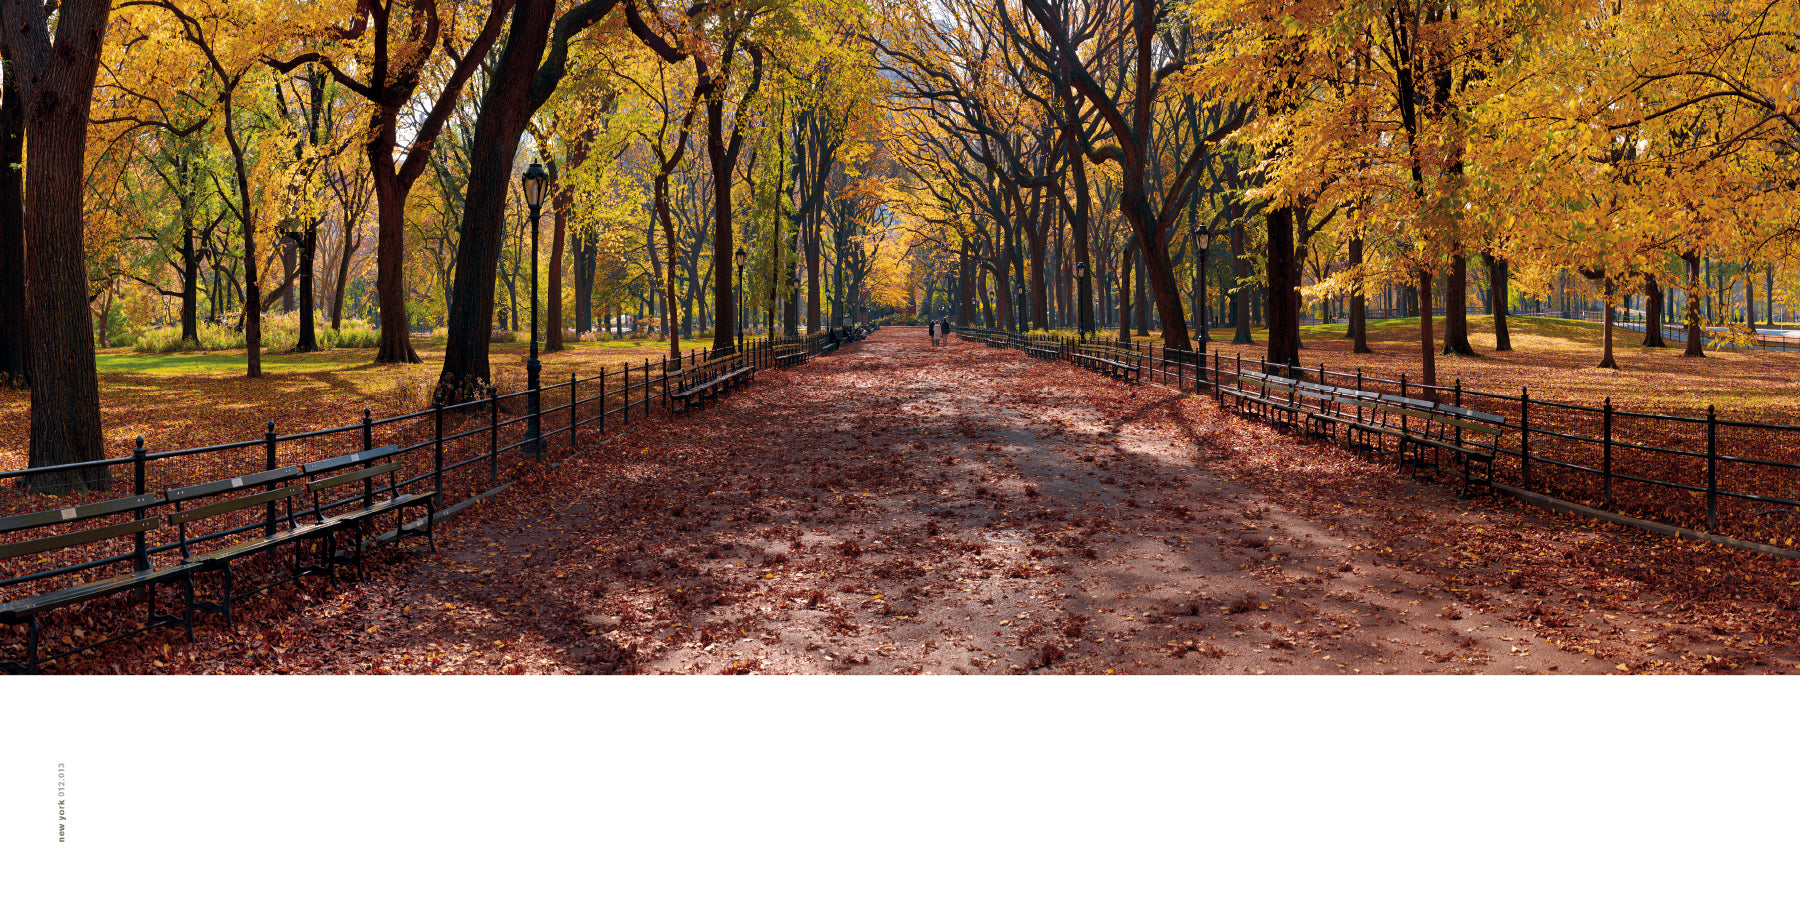 Peter Lik panoramic photograph of Central Park in New York City in Autumn with yellow trees 